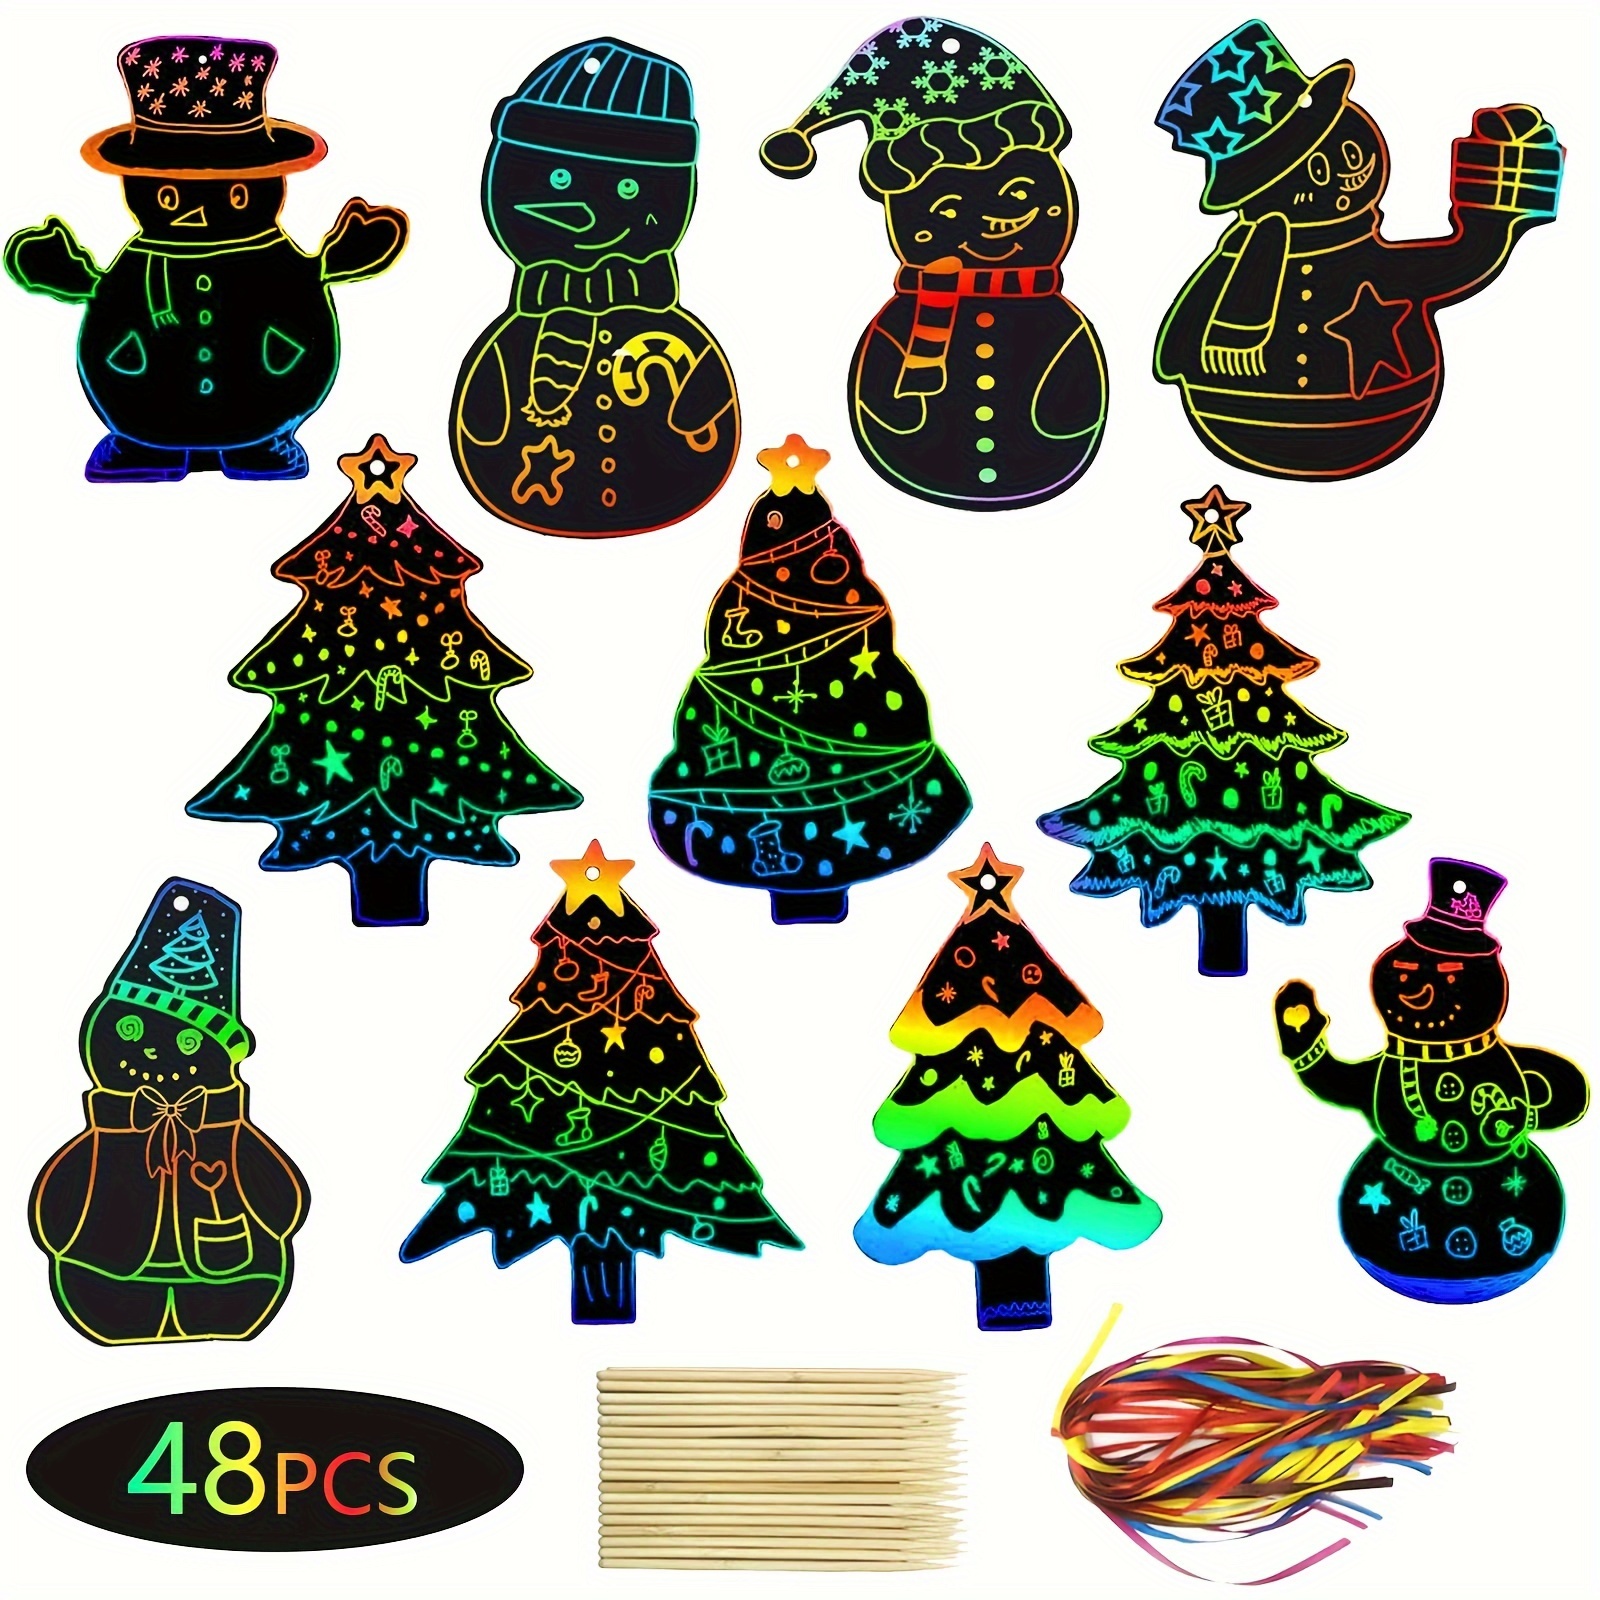 

48pcs Rainbow Scratch Colorful Christmas Ornaments, Magic Scratch Off Cards With 48pcs Ribbons & 24pcs Wooden Styluses Christmas Hanging Art Crafts Party Supplies For Xmas Tree Classroom Decorations